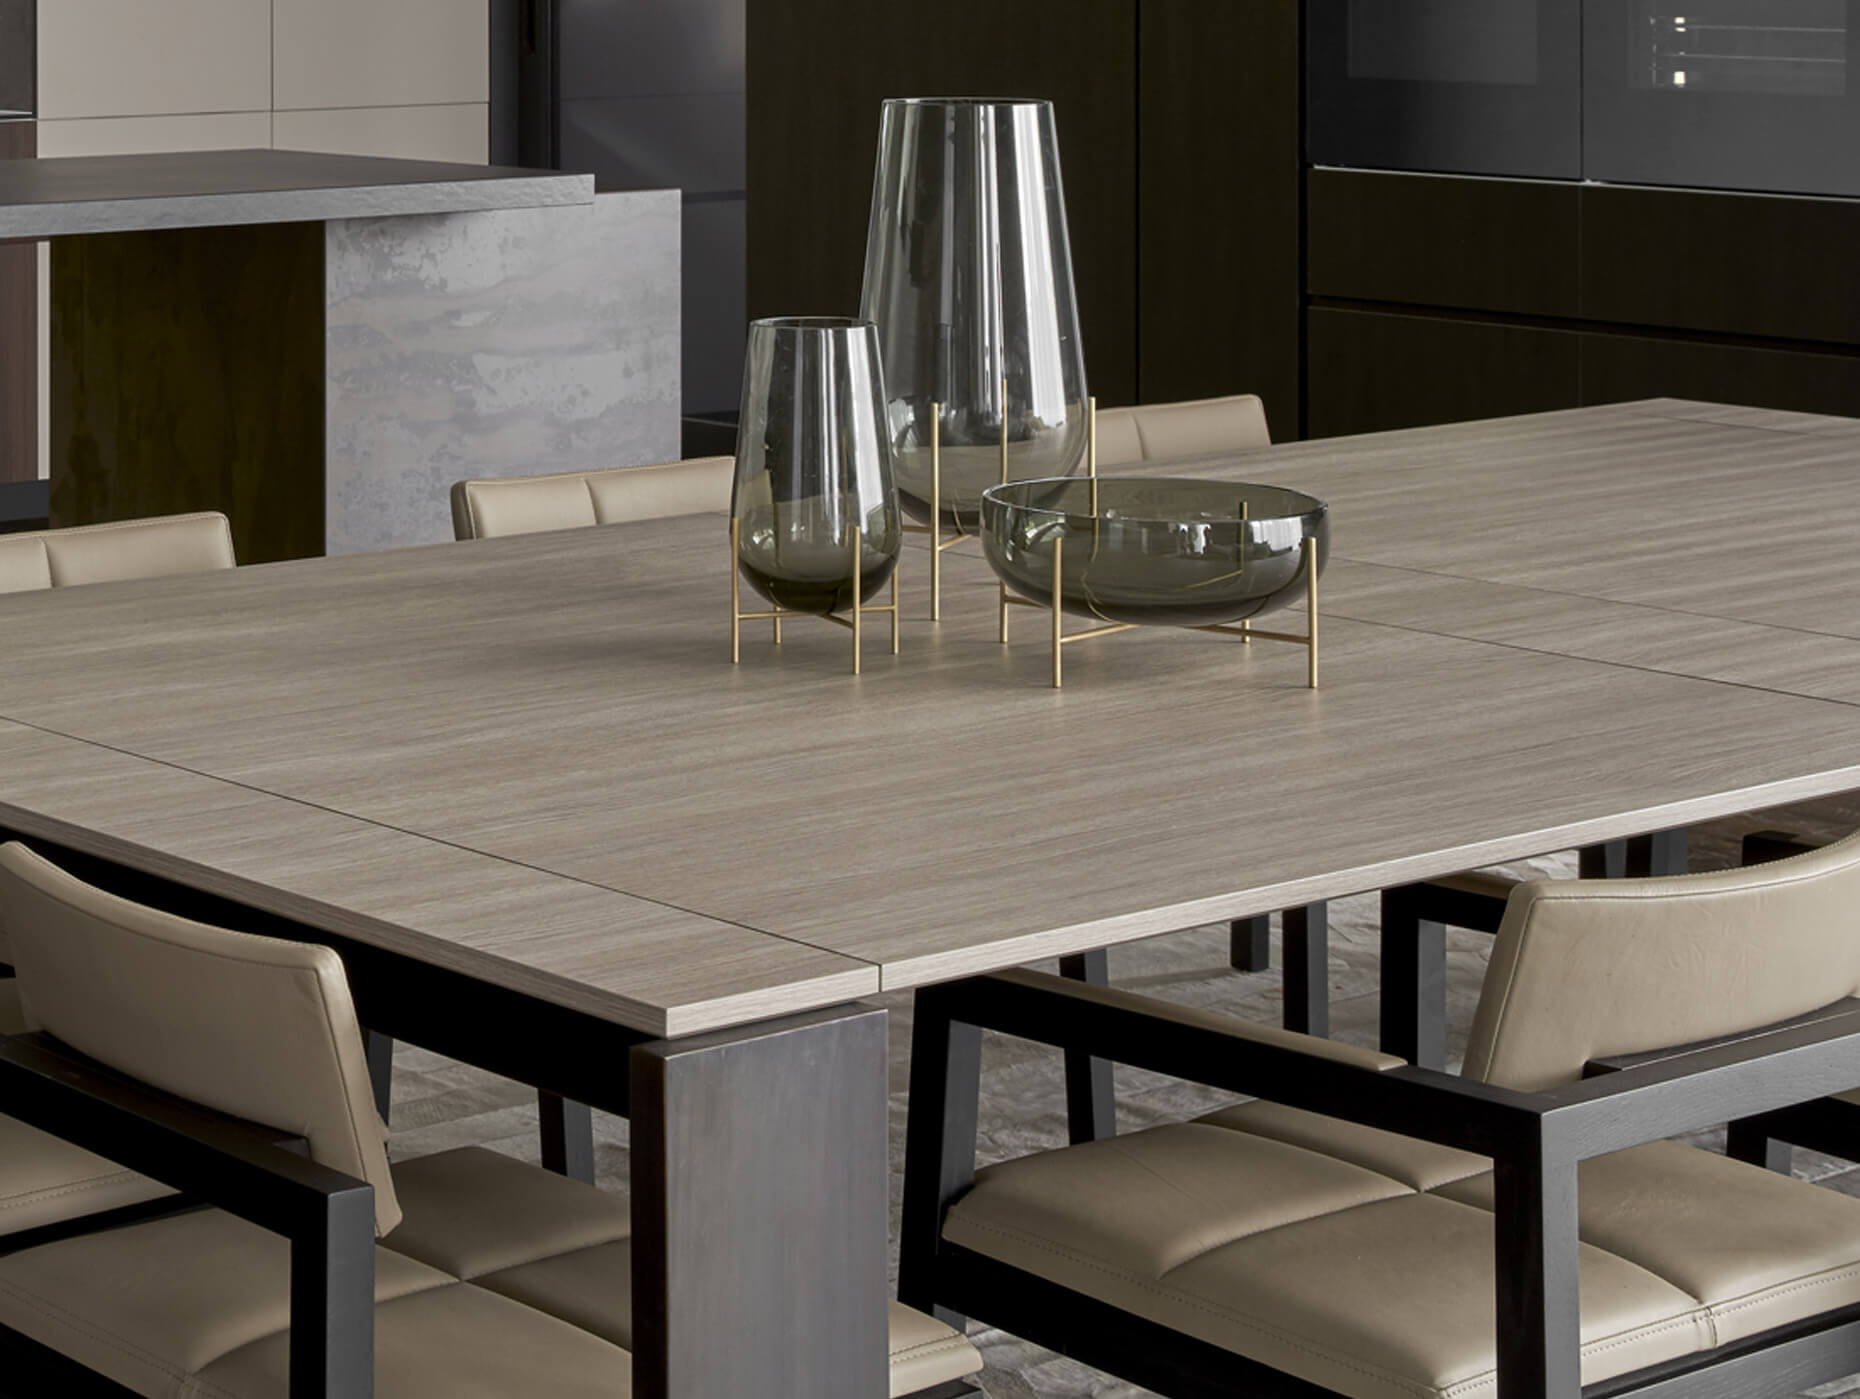 This beautiful high end family home combines elegance with practically through this beautiful crafted dining table by Australian designer FrancoCrea